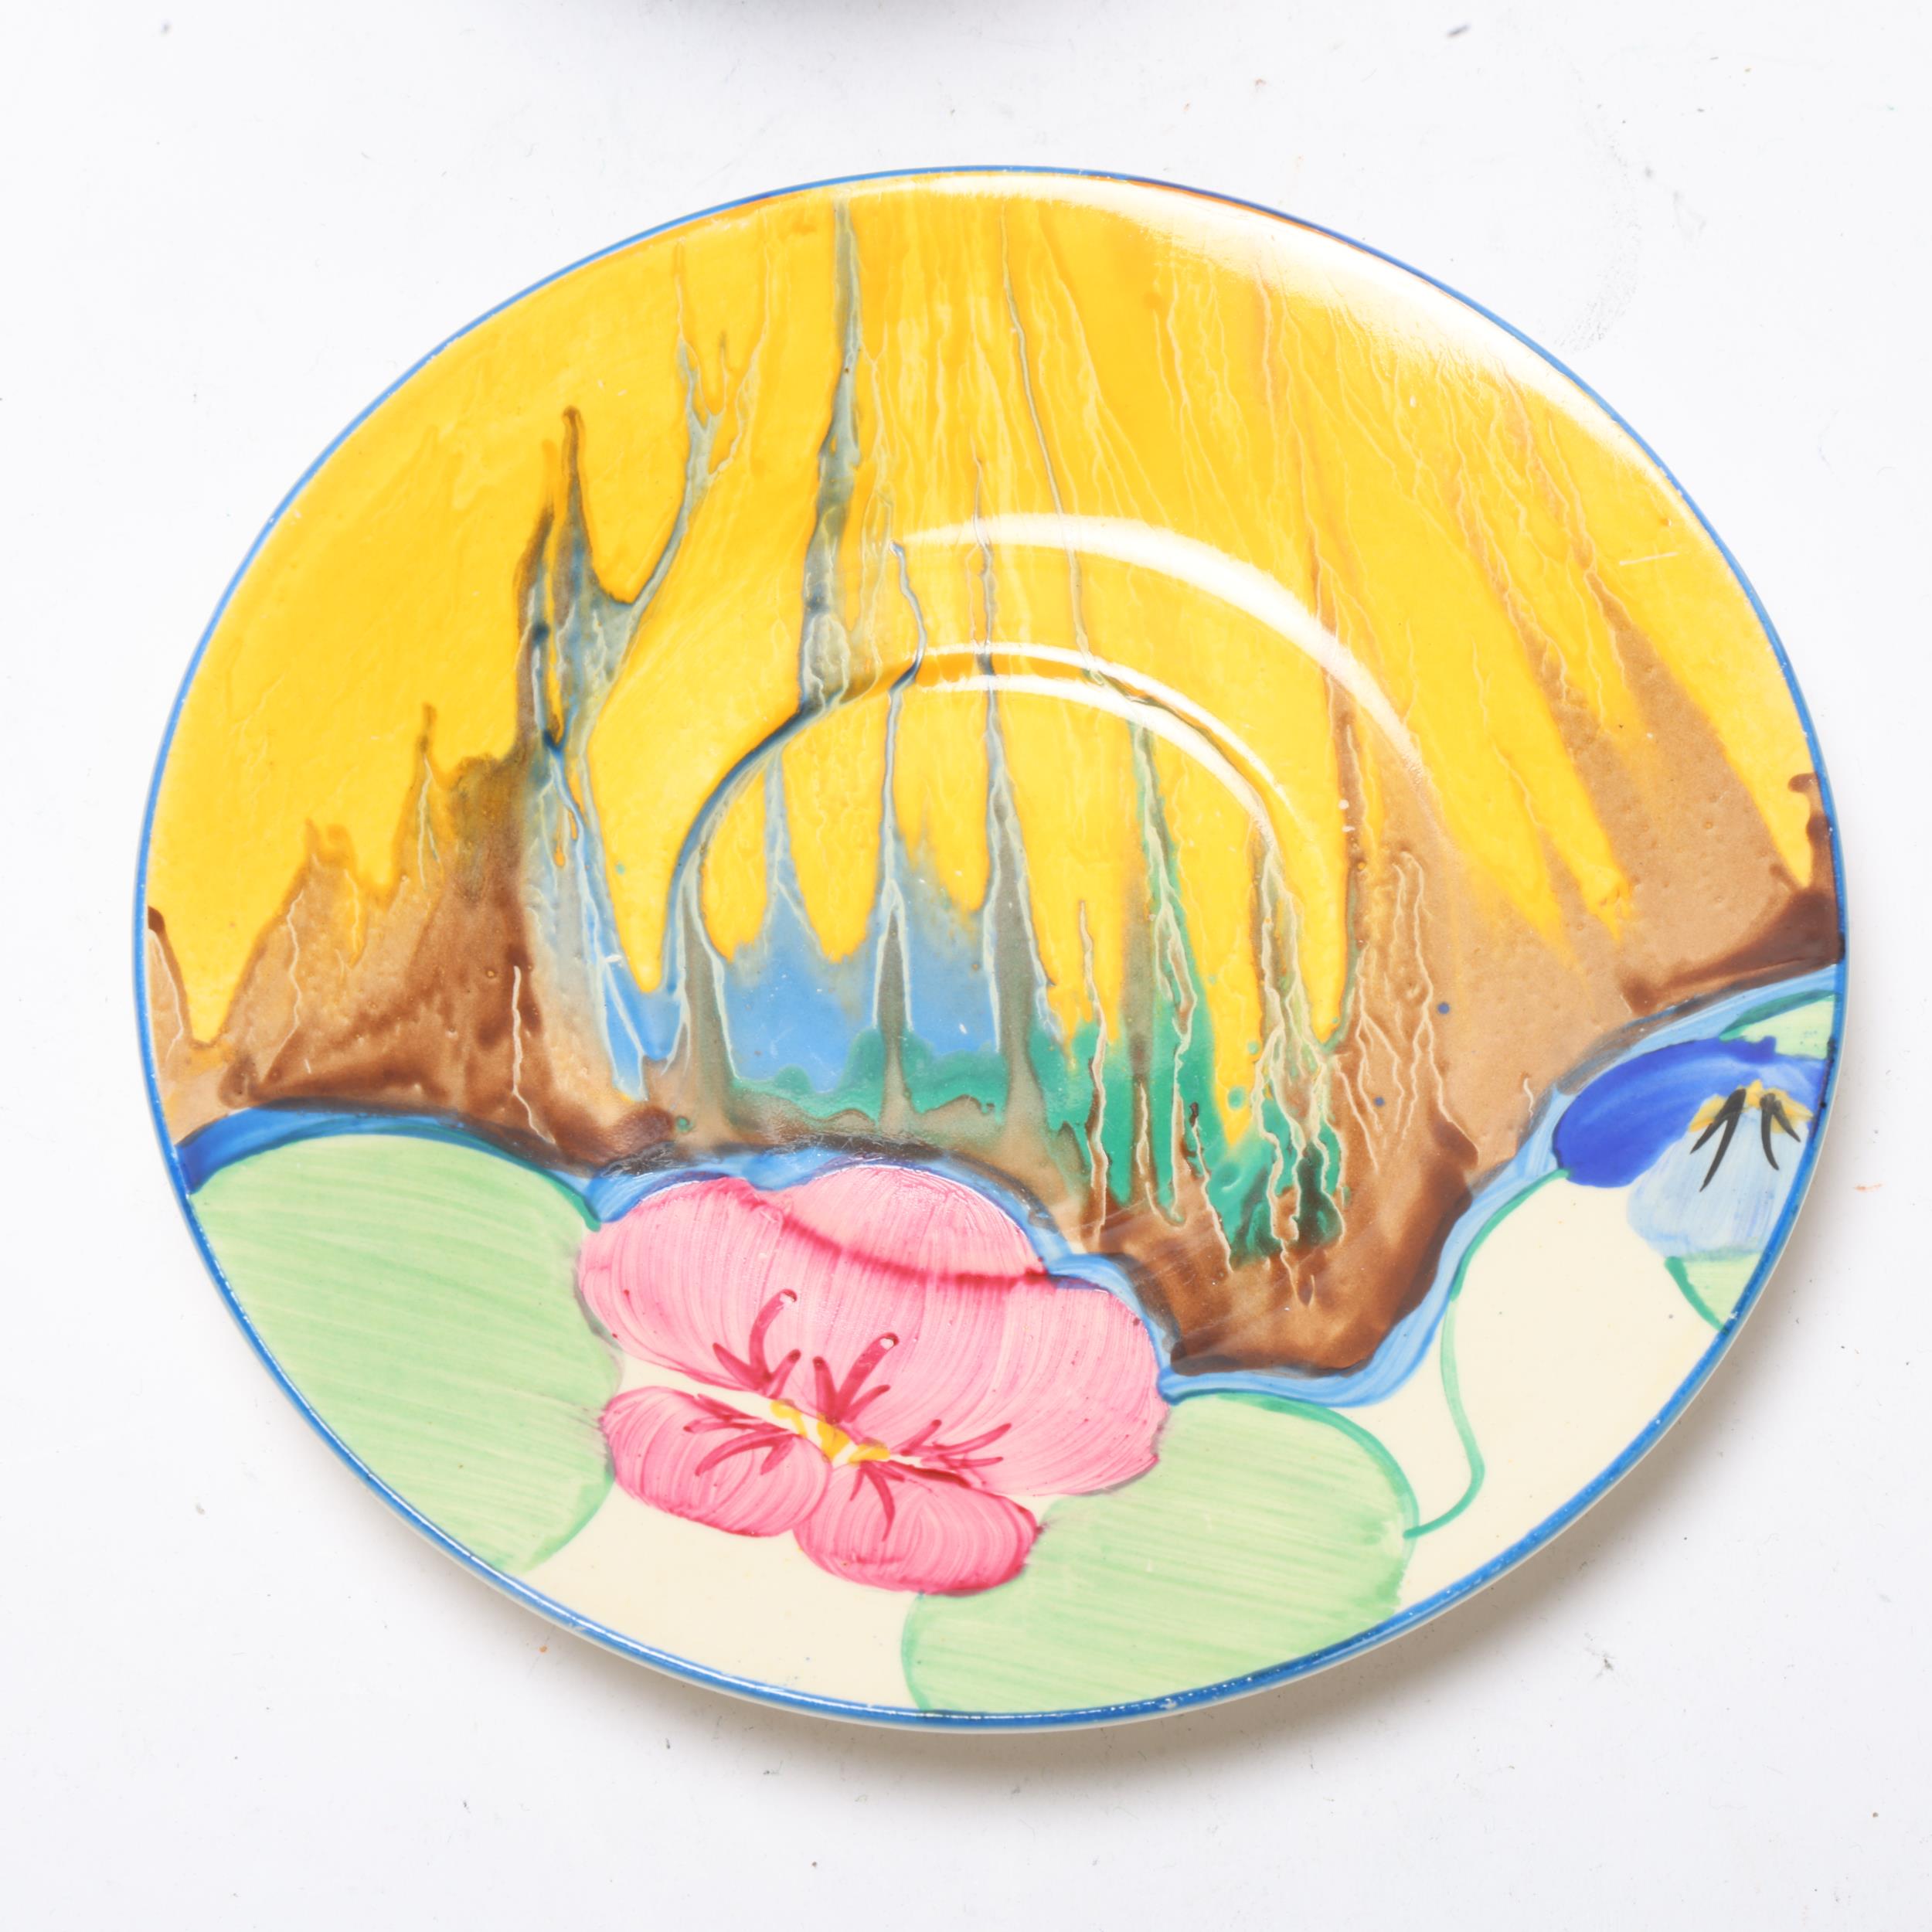 Clarice Cliff Delicia Pansies cup and saucer, saucer diameter 14.5cm Good condition, no chips cracks - Image 2 of 3